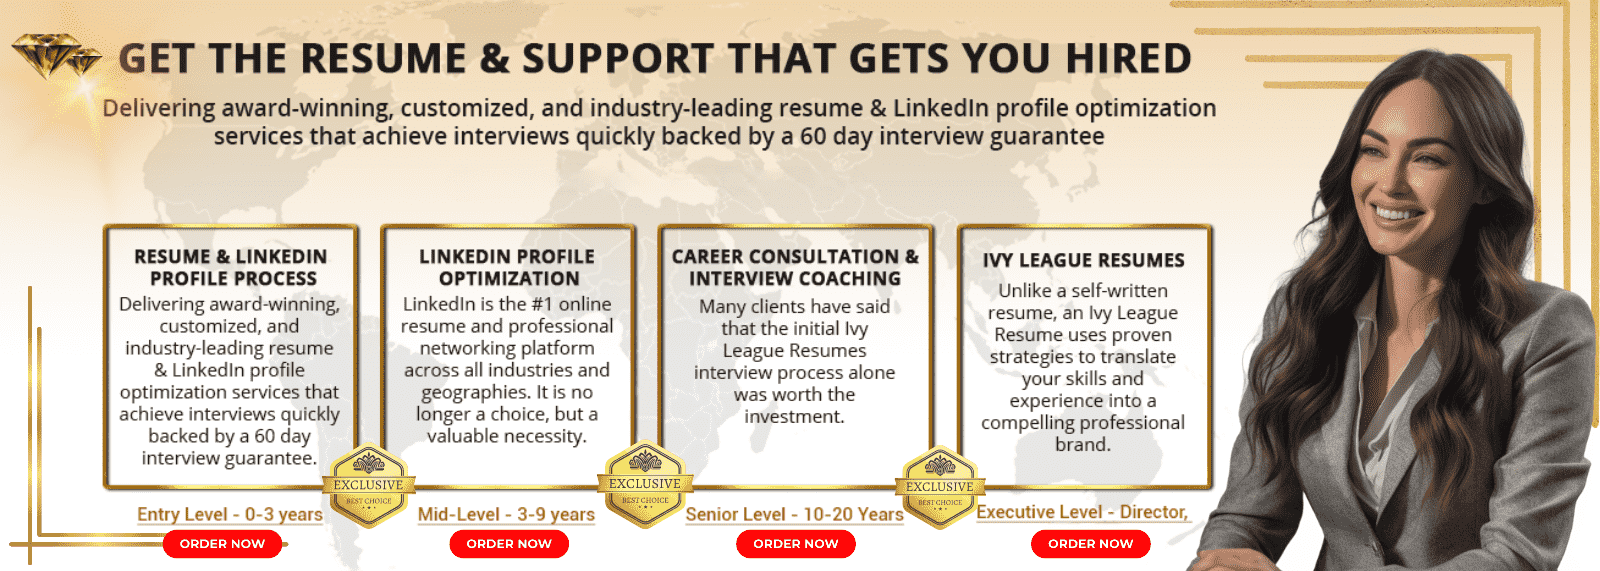 ivy-league-resumes-5